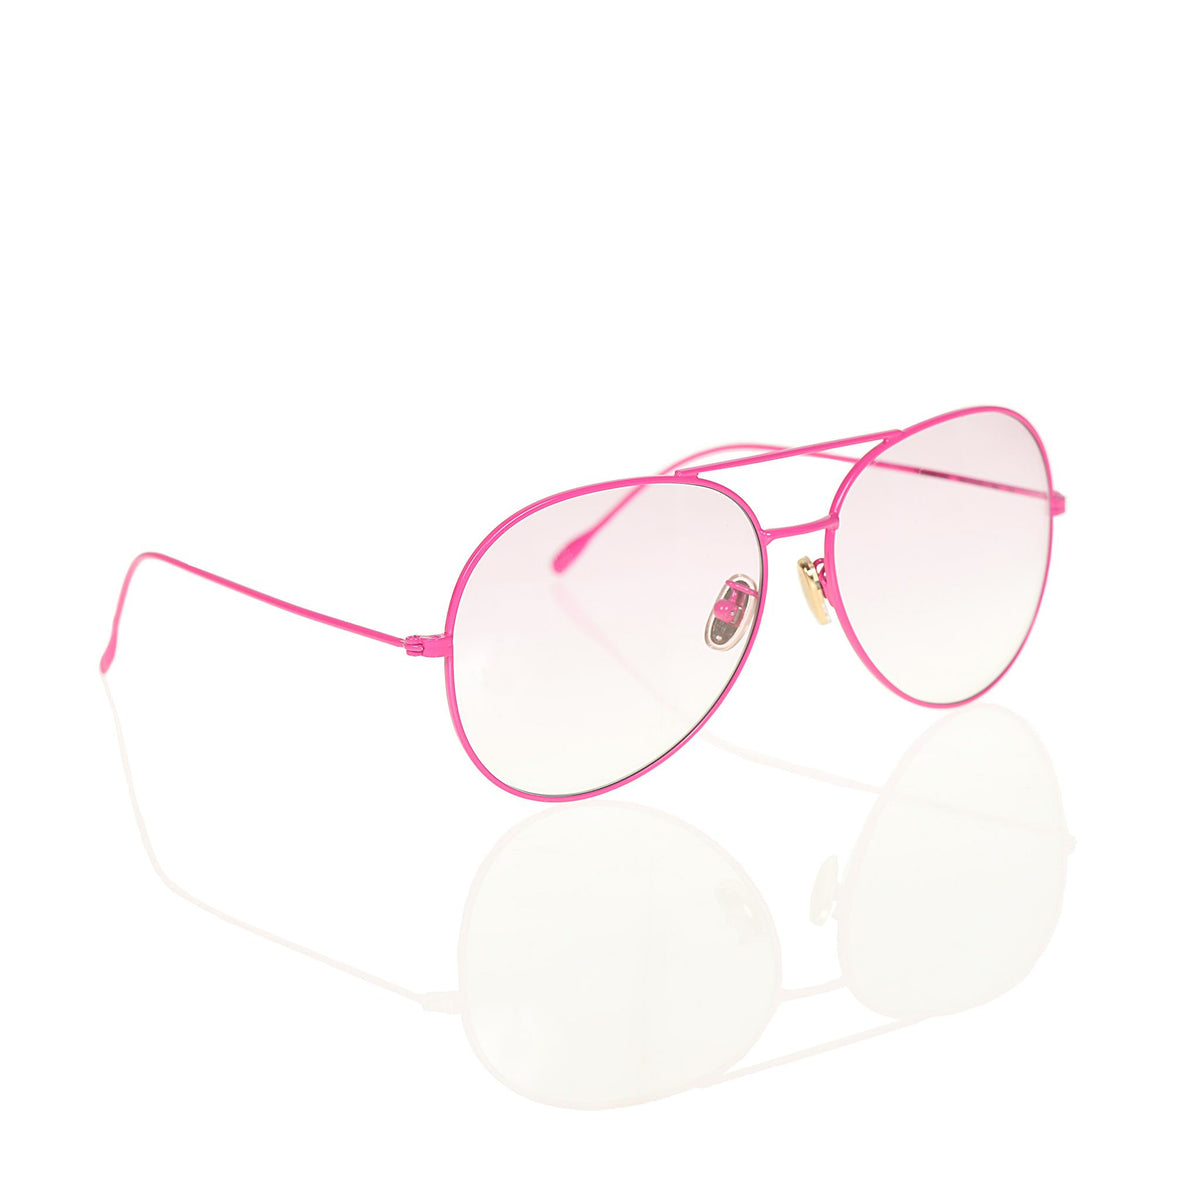 Fuchsia pink aviator sunglasses with tone on tone gradient lenses perfect for Barbie look